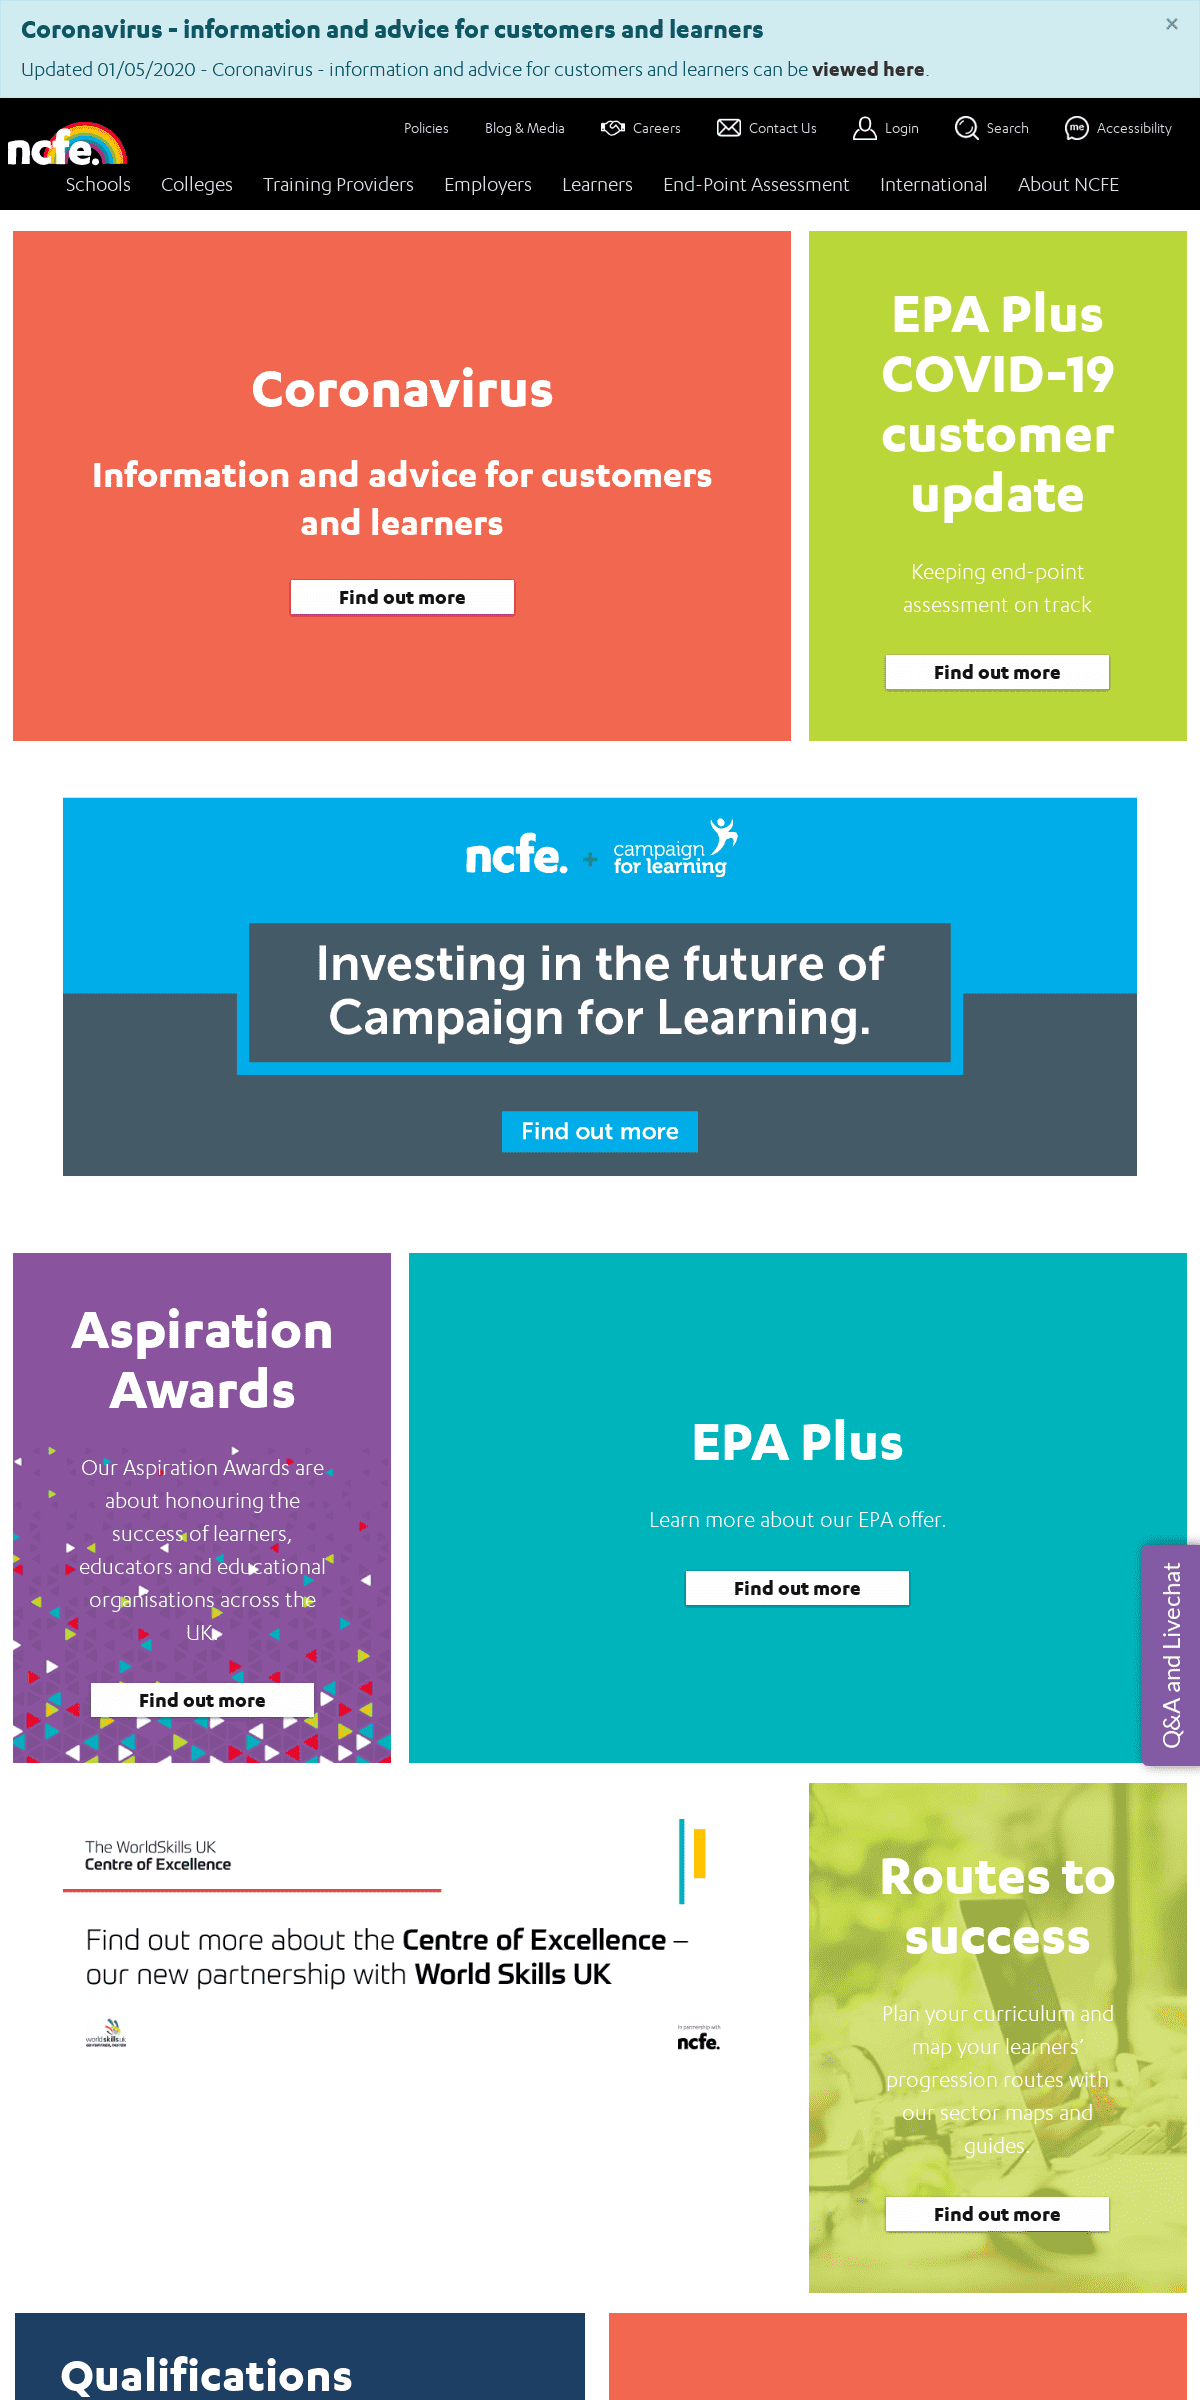 A complete backup of ncfe.org.uk